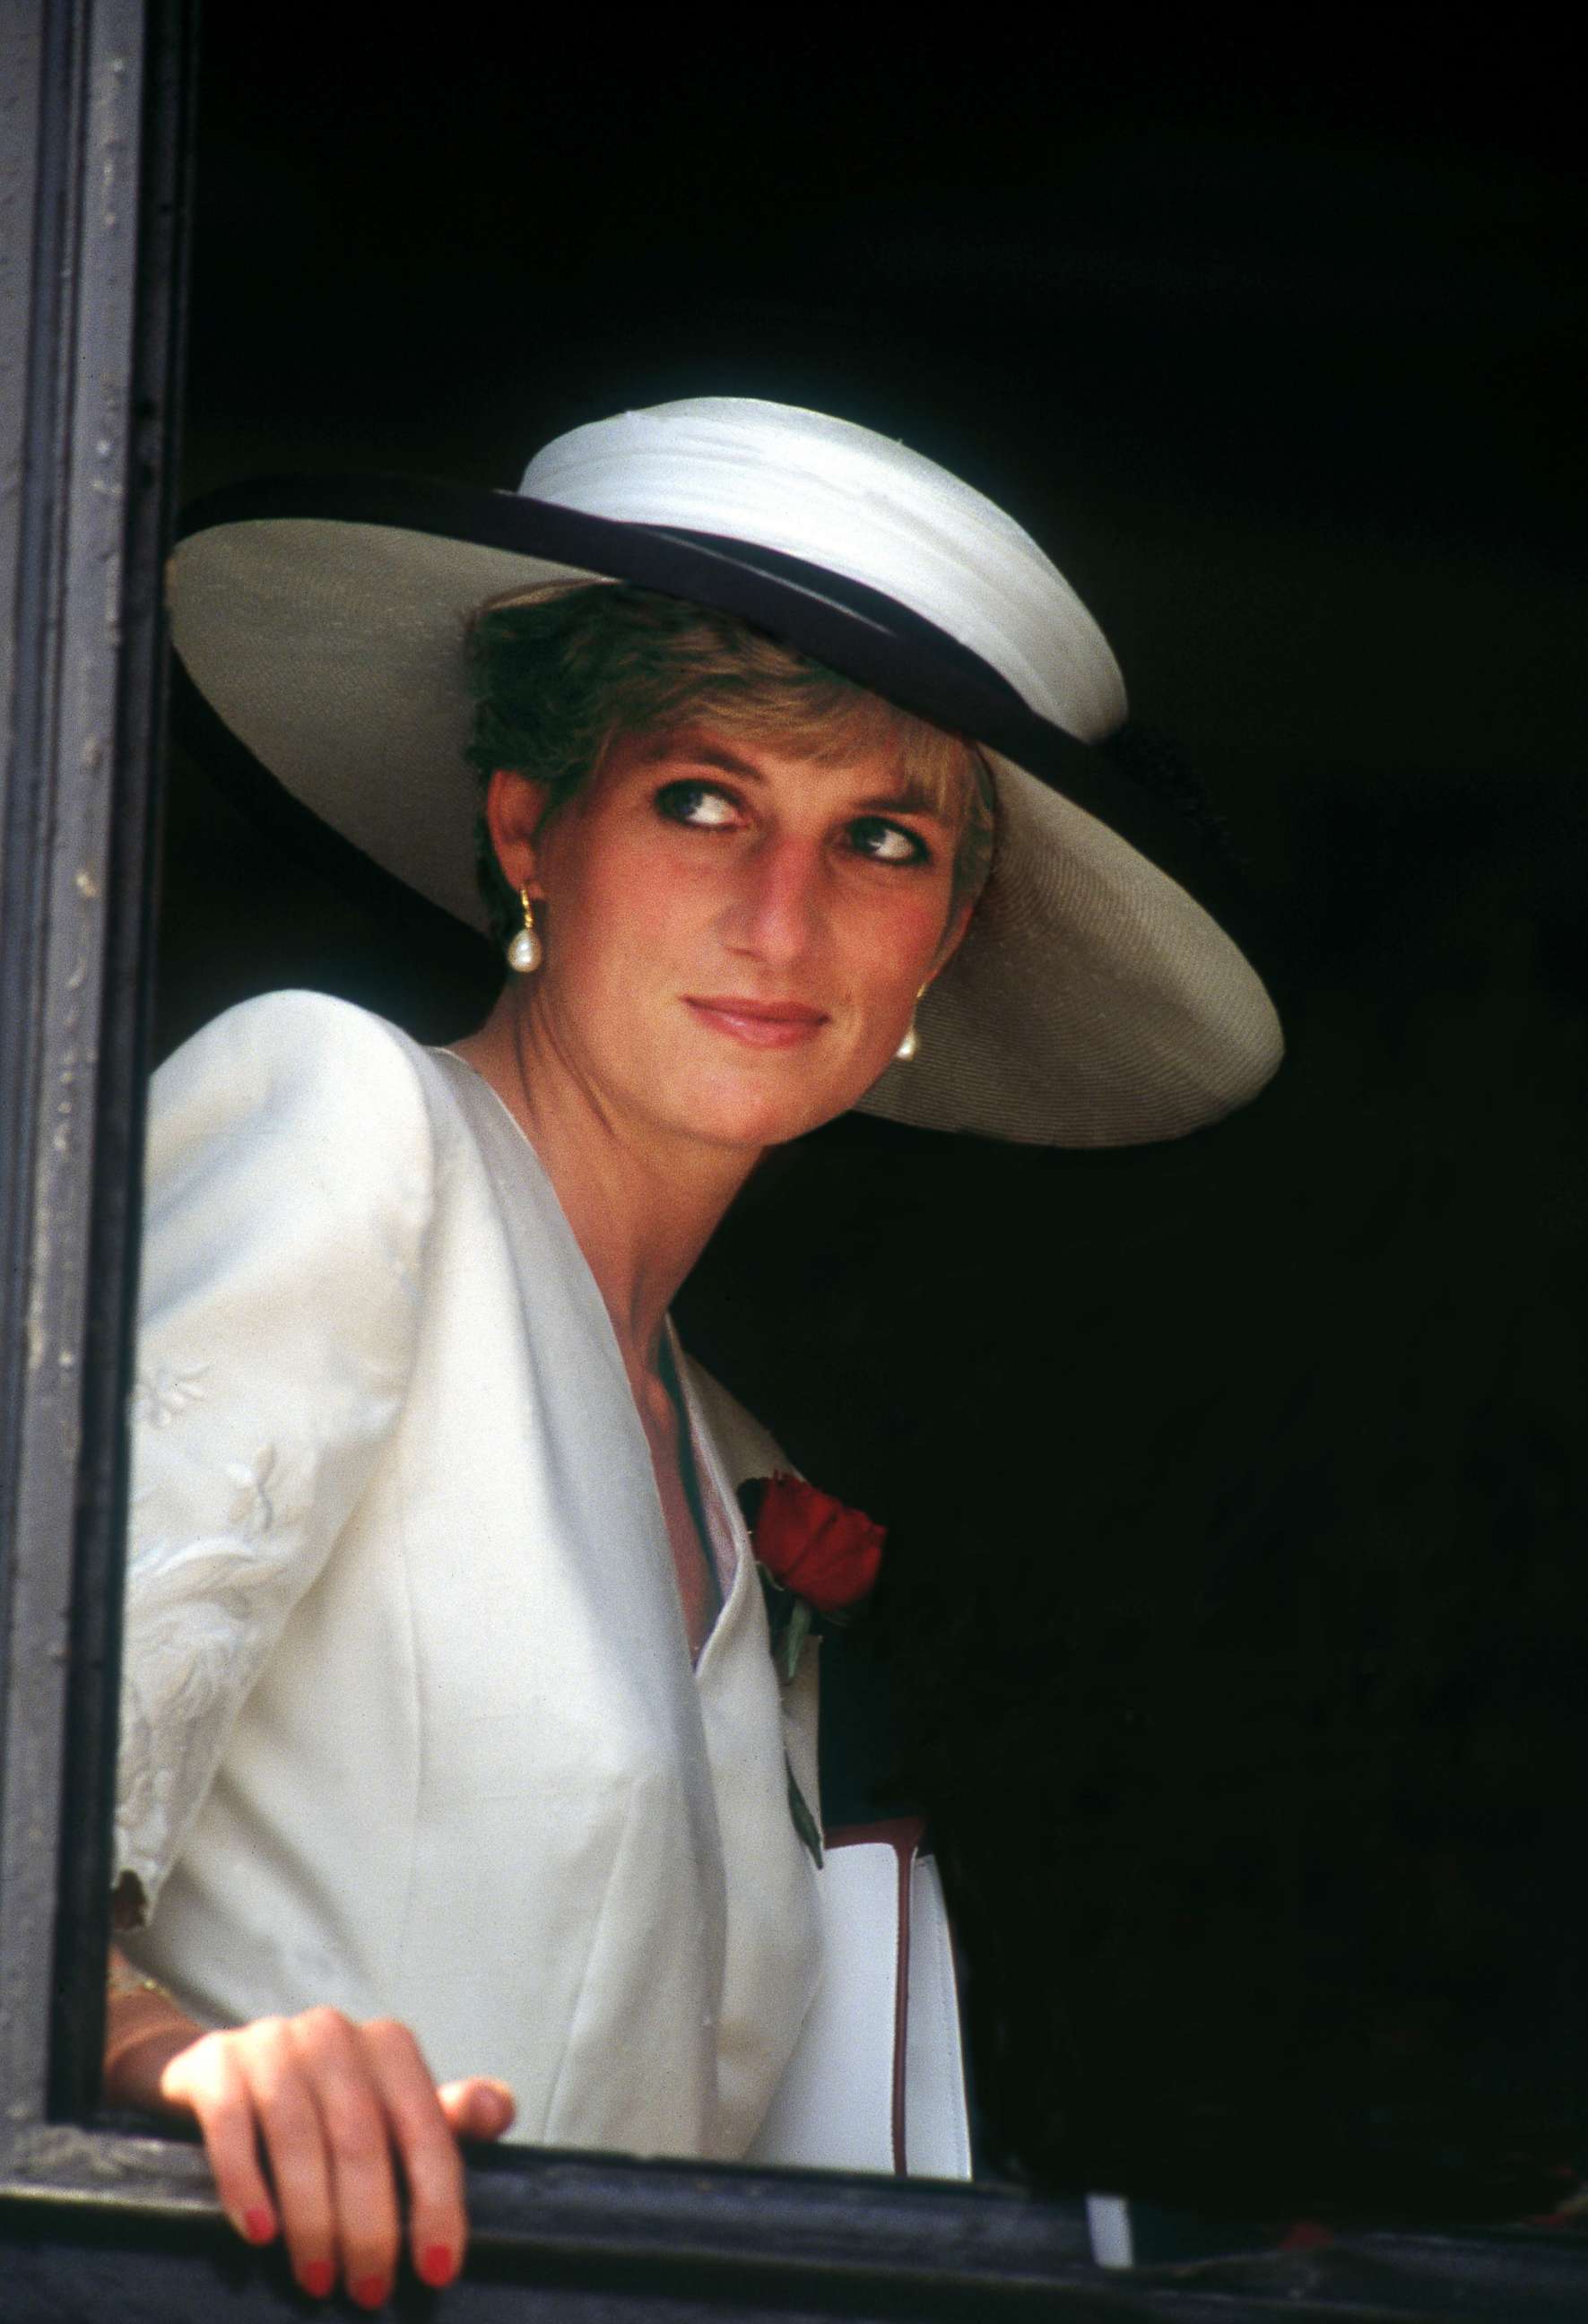 PHOTO: The Princess of Wales at Portsmouth for a ceremony celebrating the safe return of the Royal Hampshire Regiment from the Gulf War, August 1991.